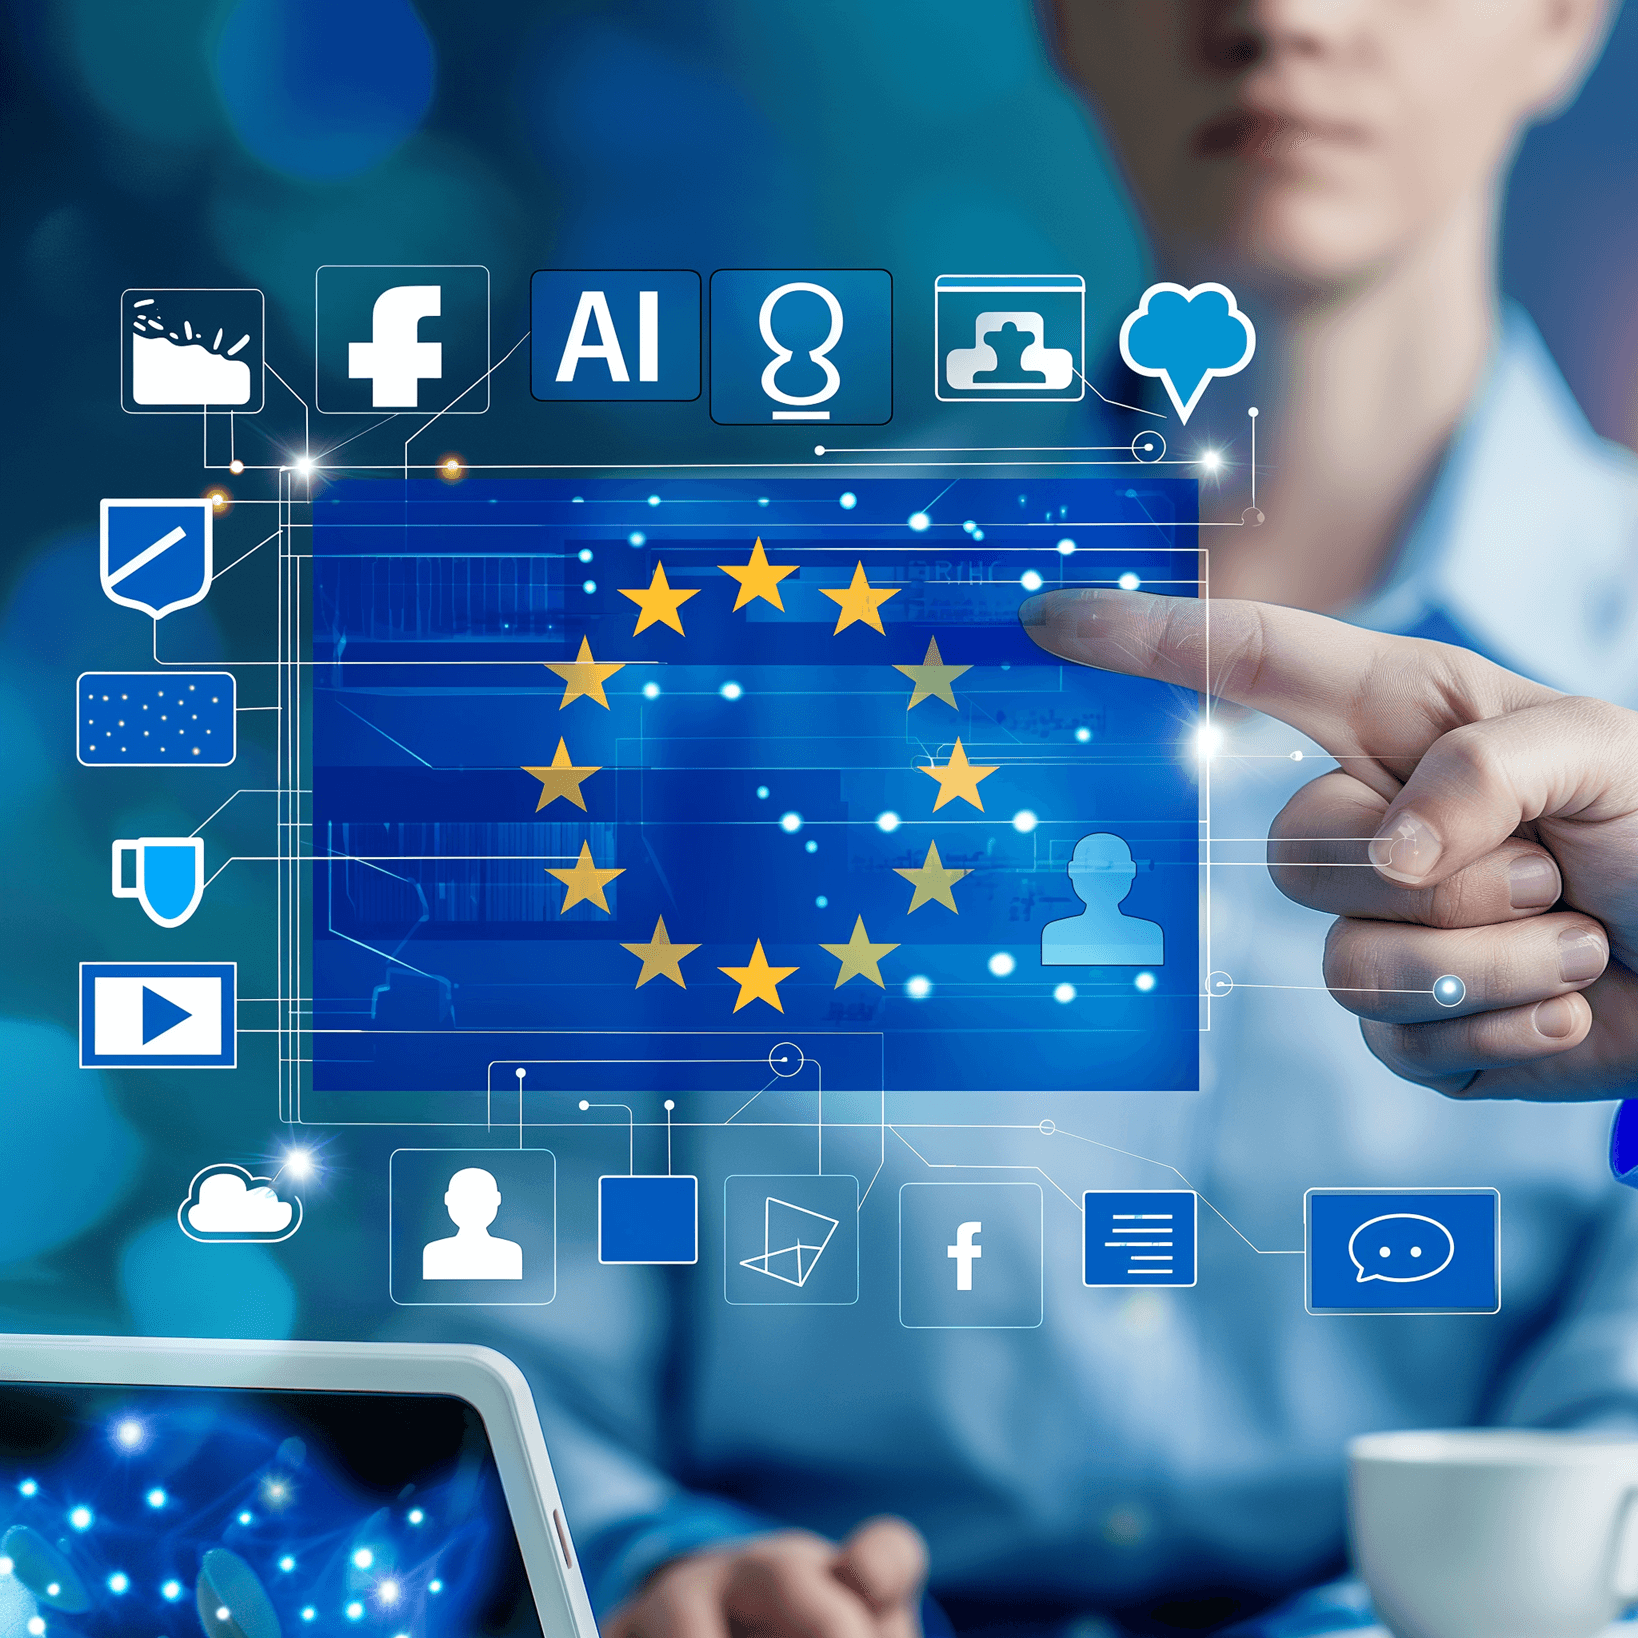 A photorealistic illustration of the European Union flag surrounded by artificial intelligence and digital marketing icons, such as social media logos or AI symbols. In front is a photorealistic female hand pointing on a laptop screen within a multilingual call center with a candid shot of a photorealistic woman's face in a blue shirt, with the text "AI", and a coffee cup. In realistic style, on a blue background